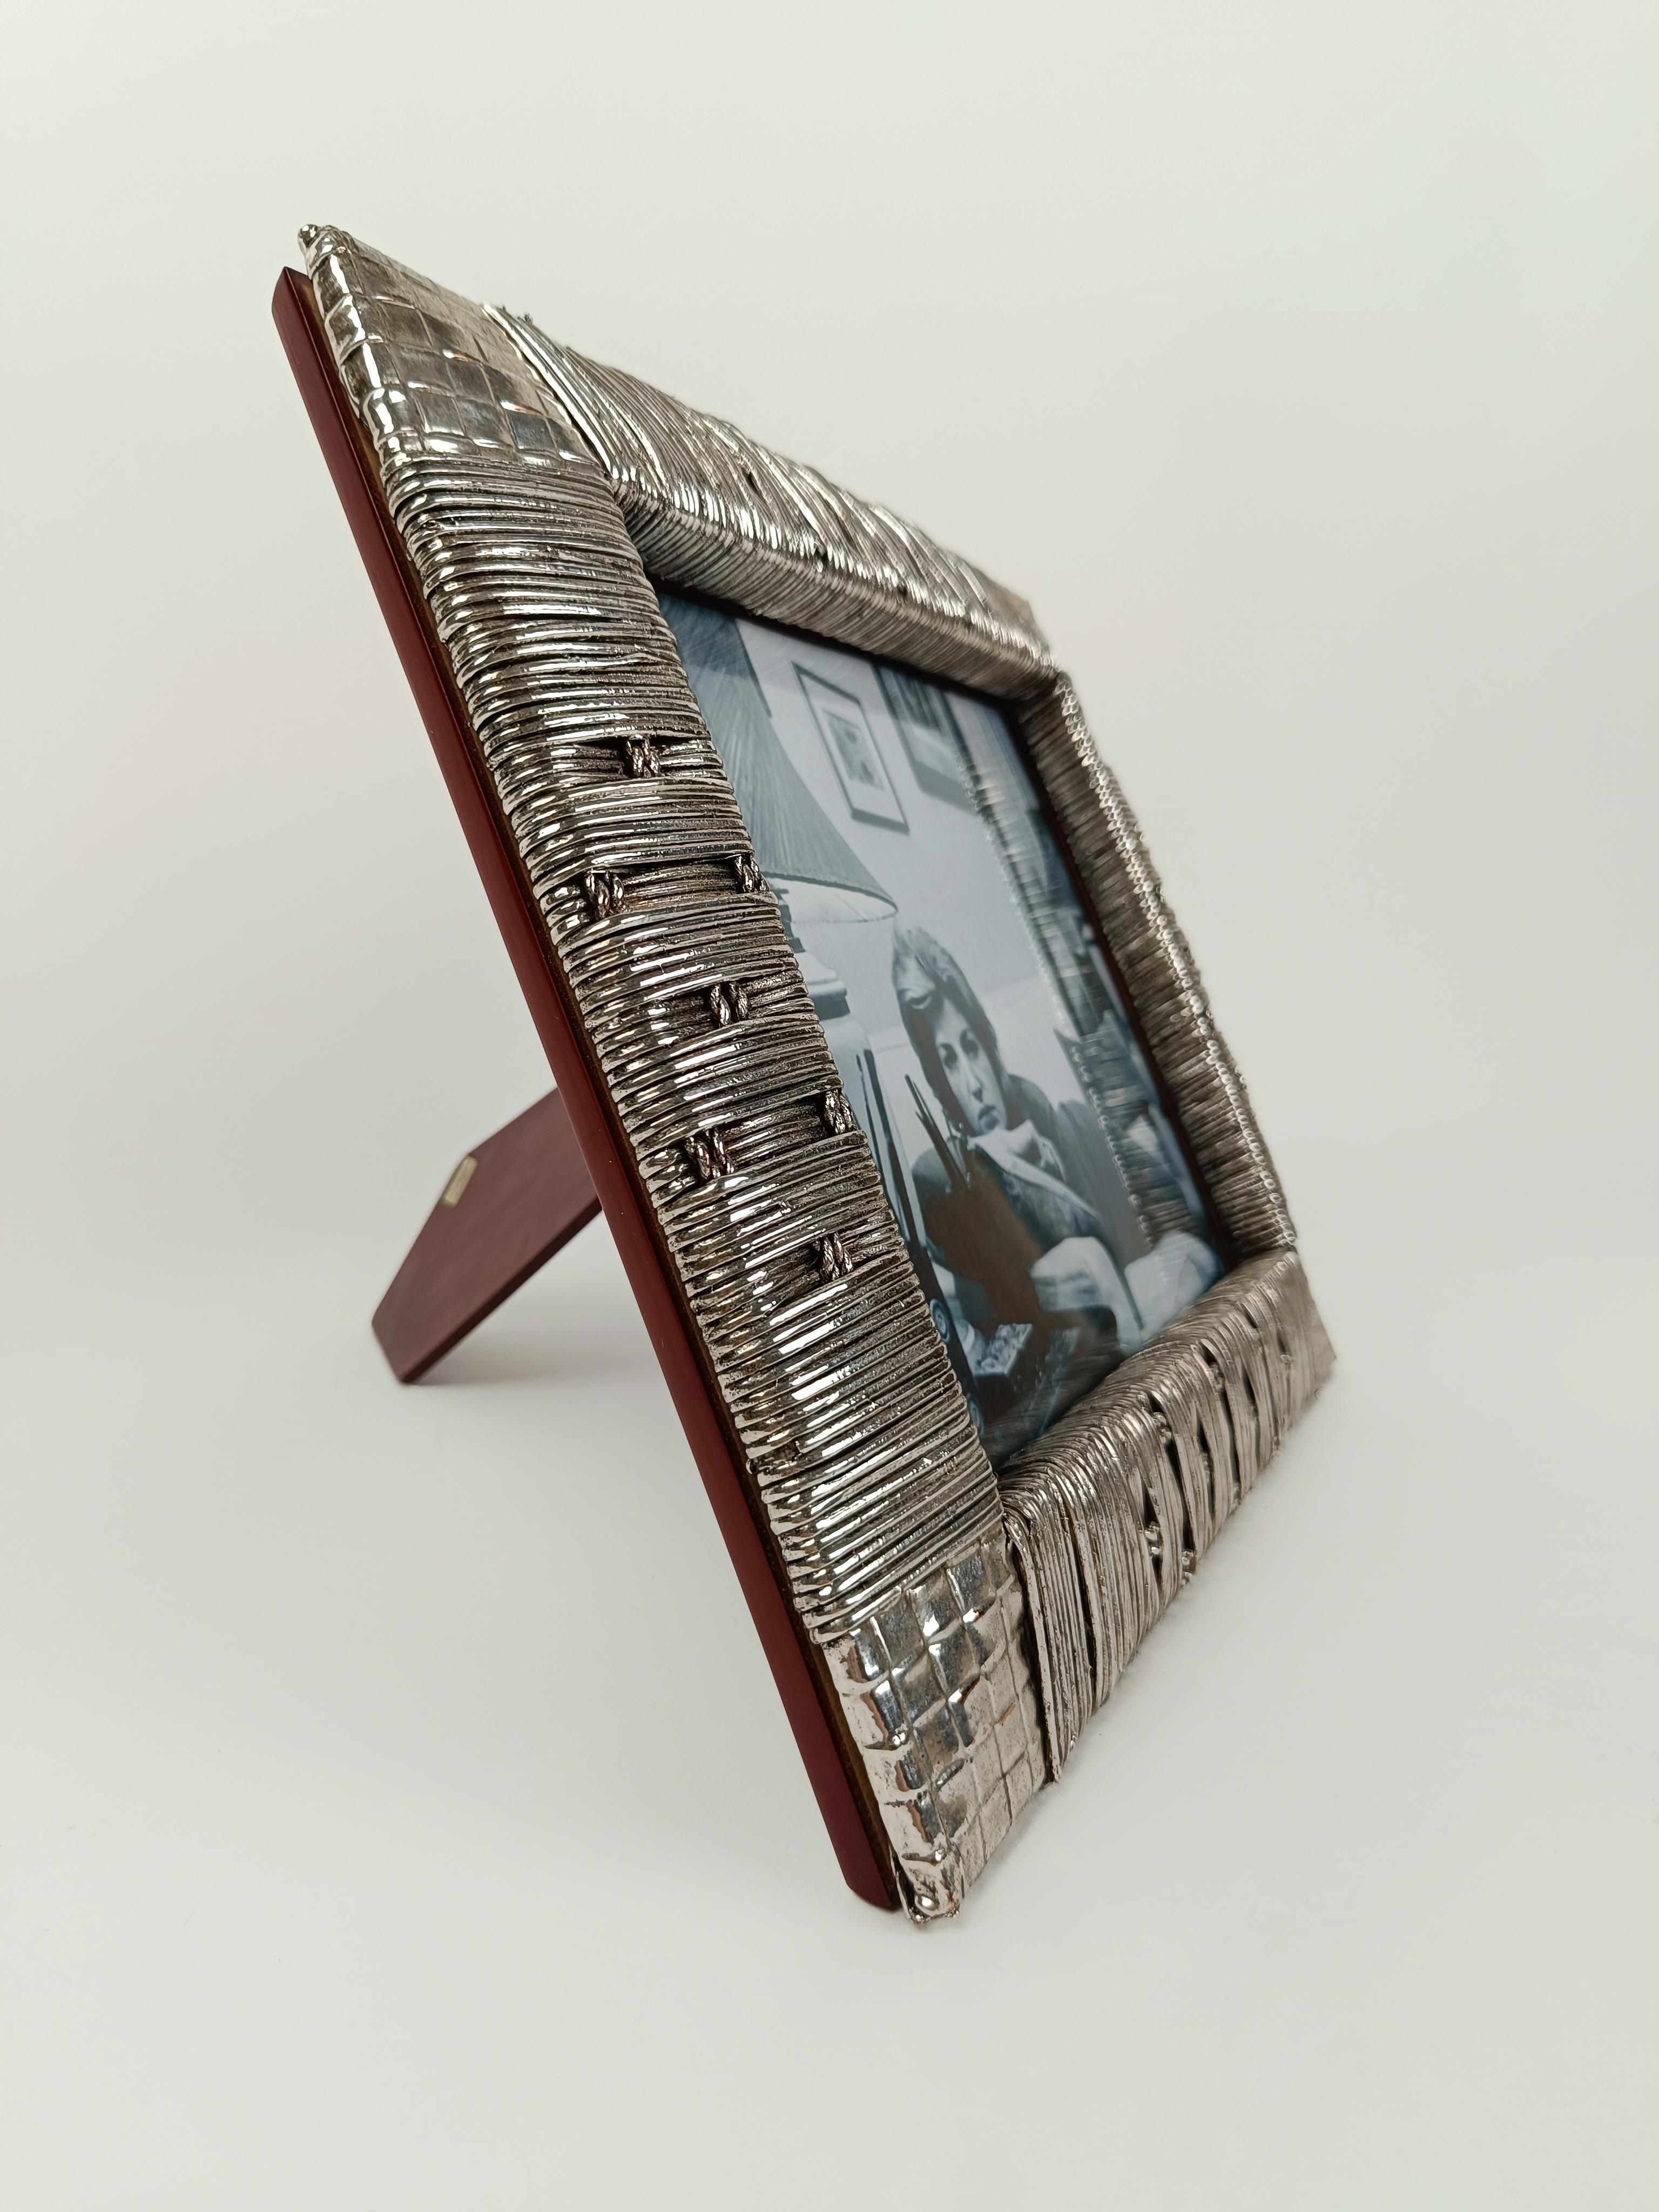 Midcentury Table Picture Frame Made in Silver Plated Woven Wicker, Italy 1970s For Sale 5